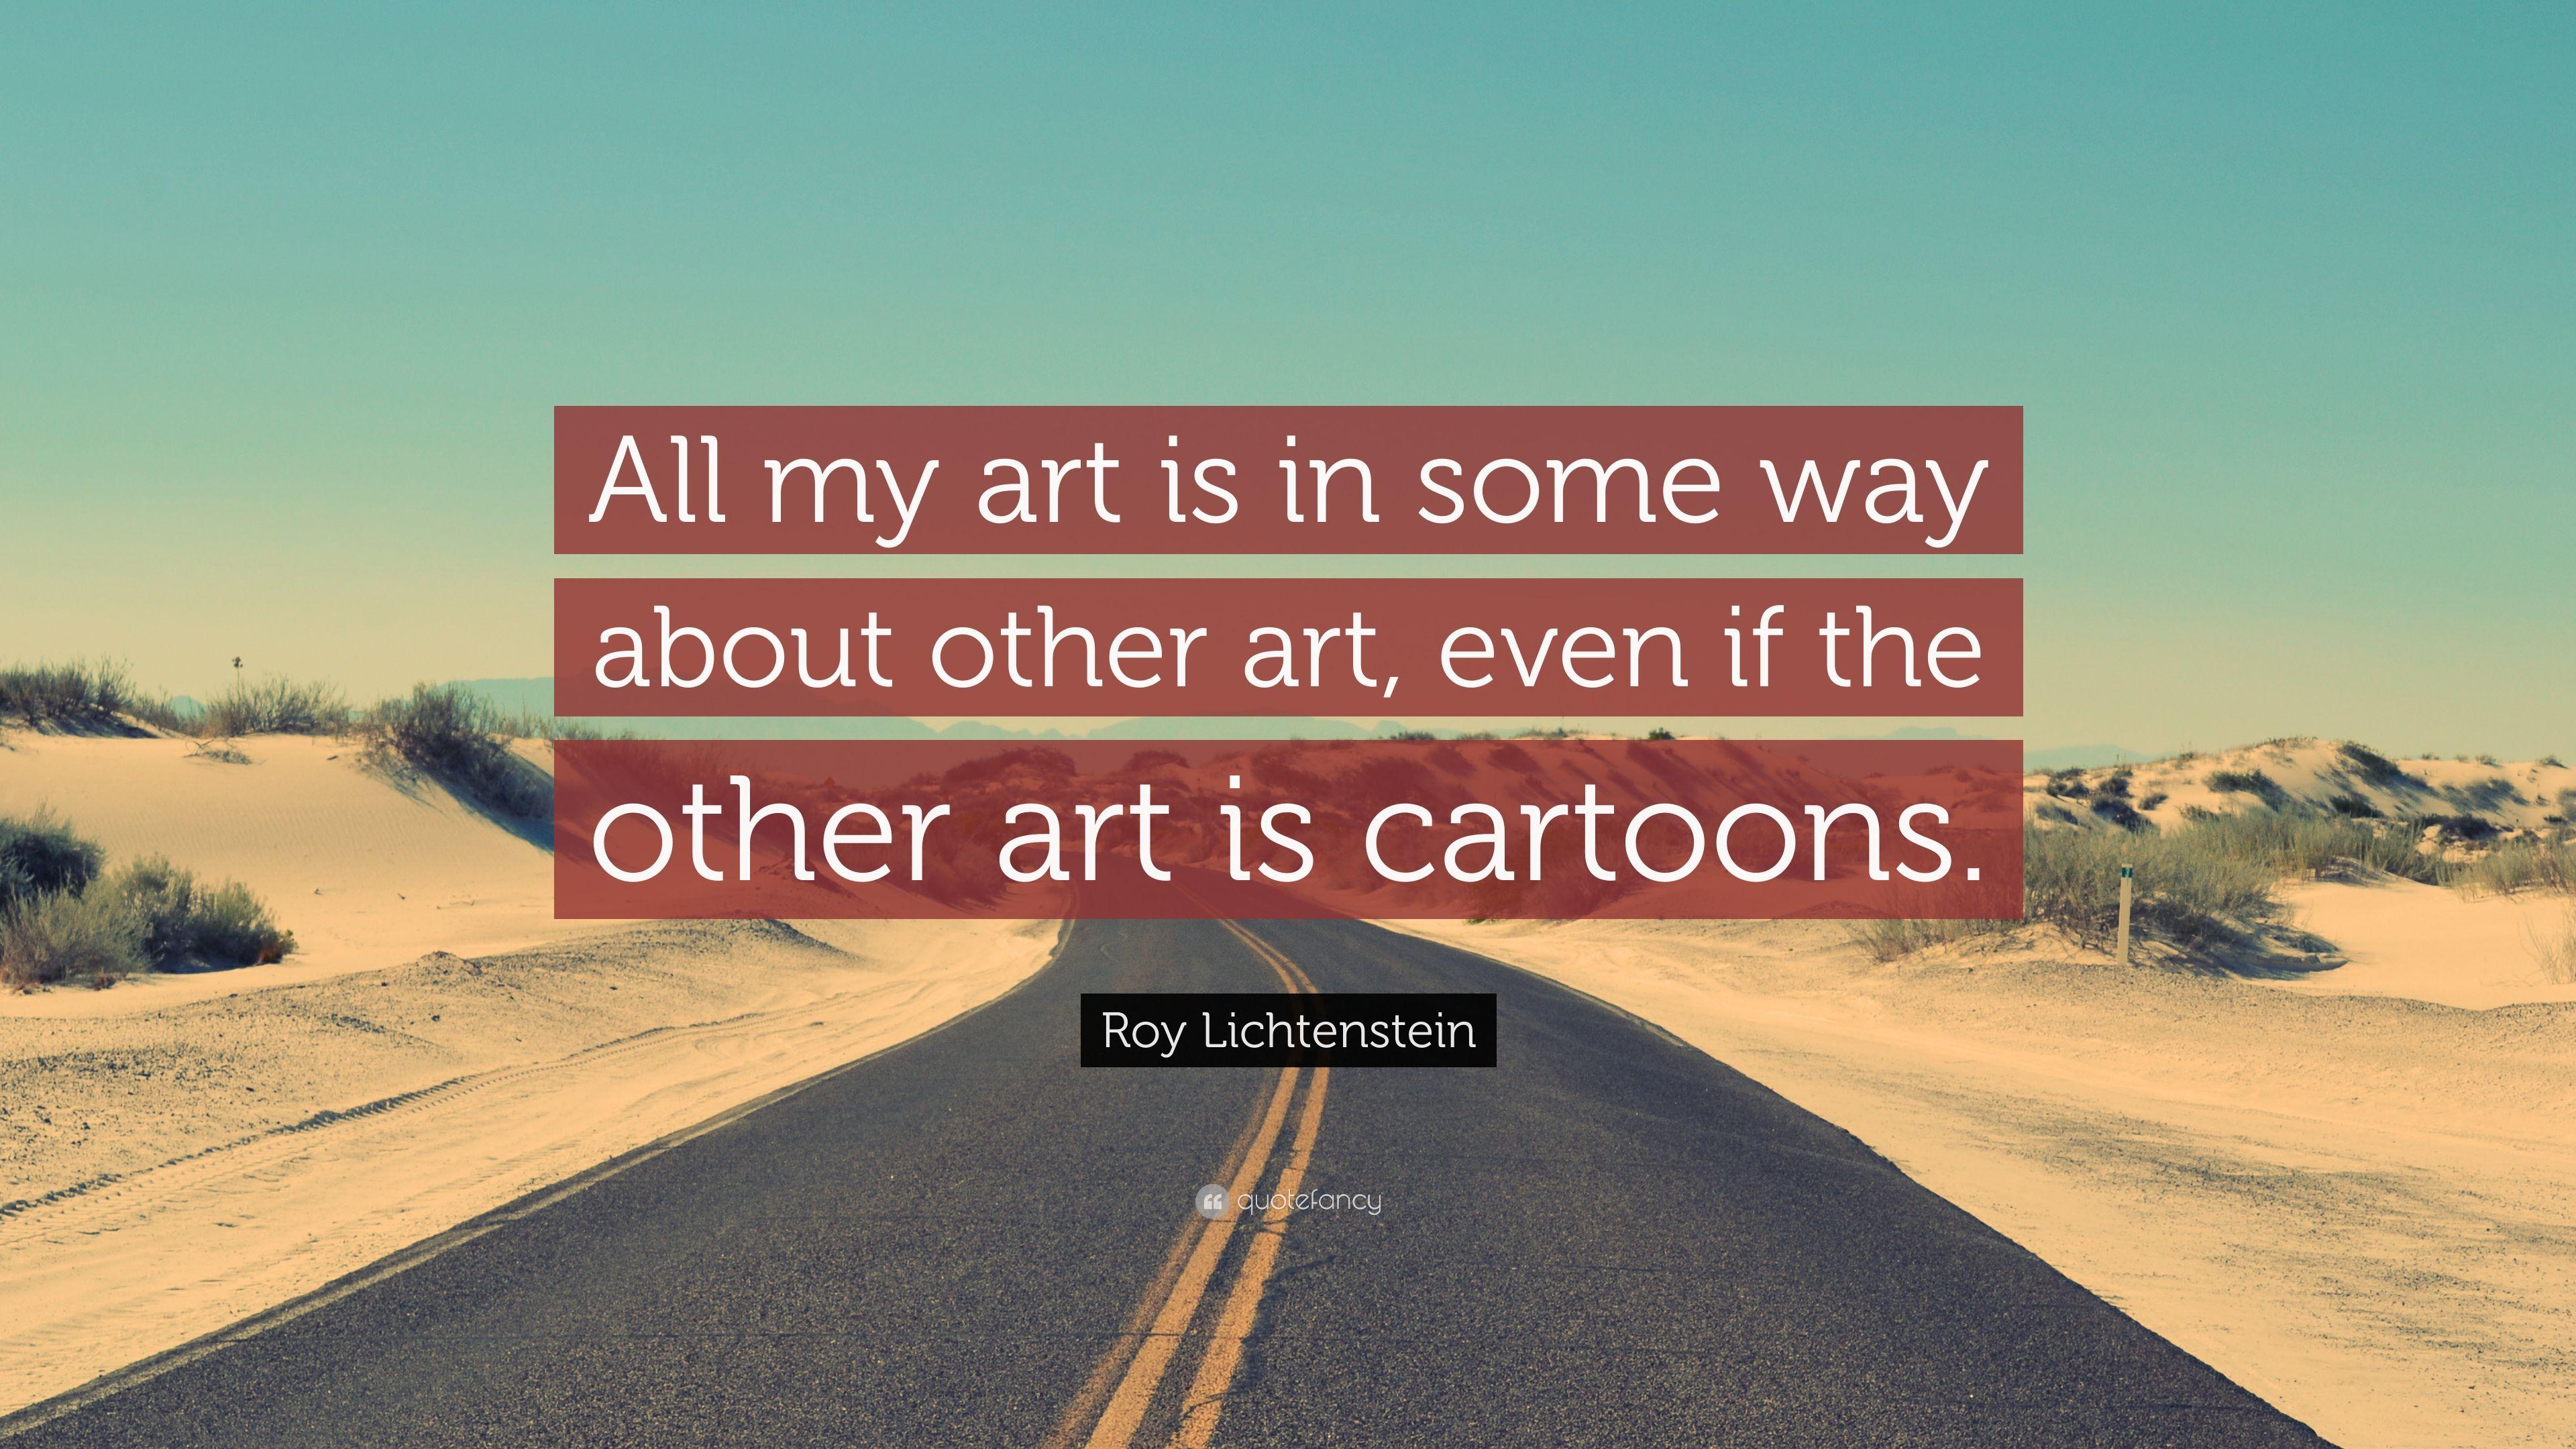 Roy Lichtenstein Quote: “All my art is in some way about other art